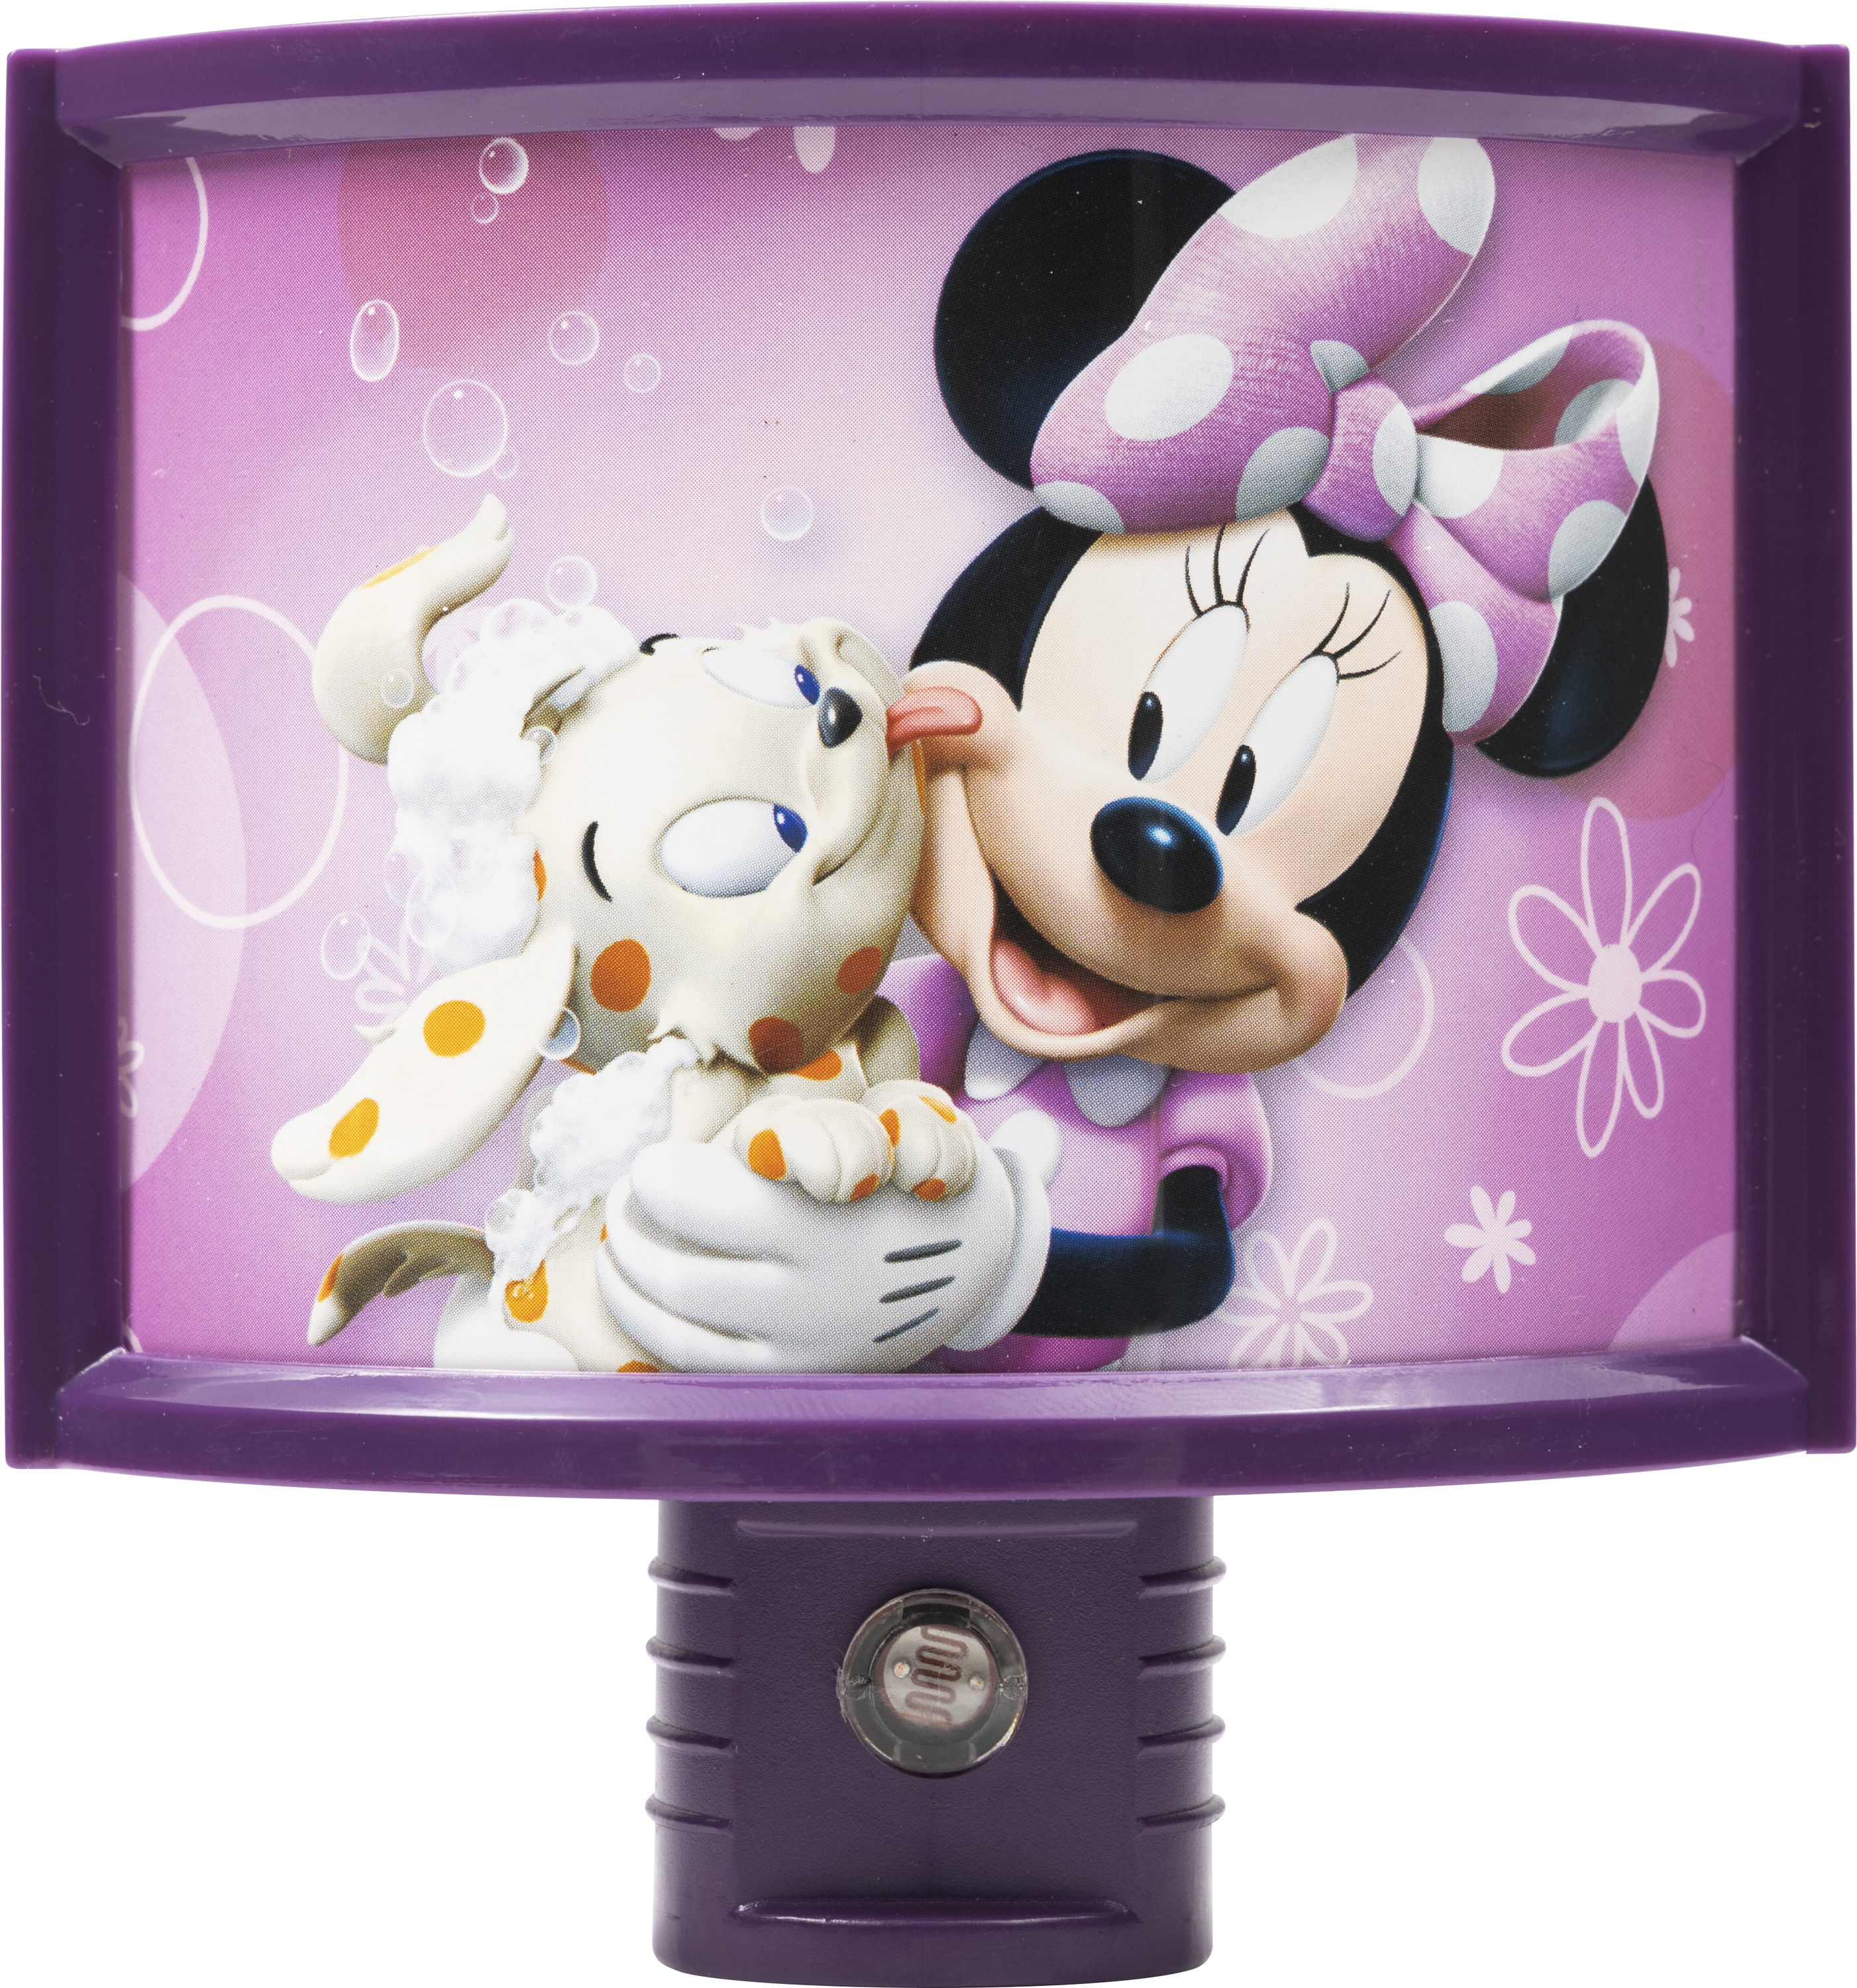 Disney Minnie's Bow-tique LED Auto On/Off Night Light in Night Lights at Lowes.com